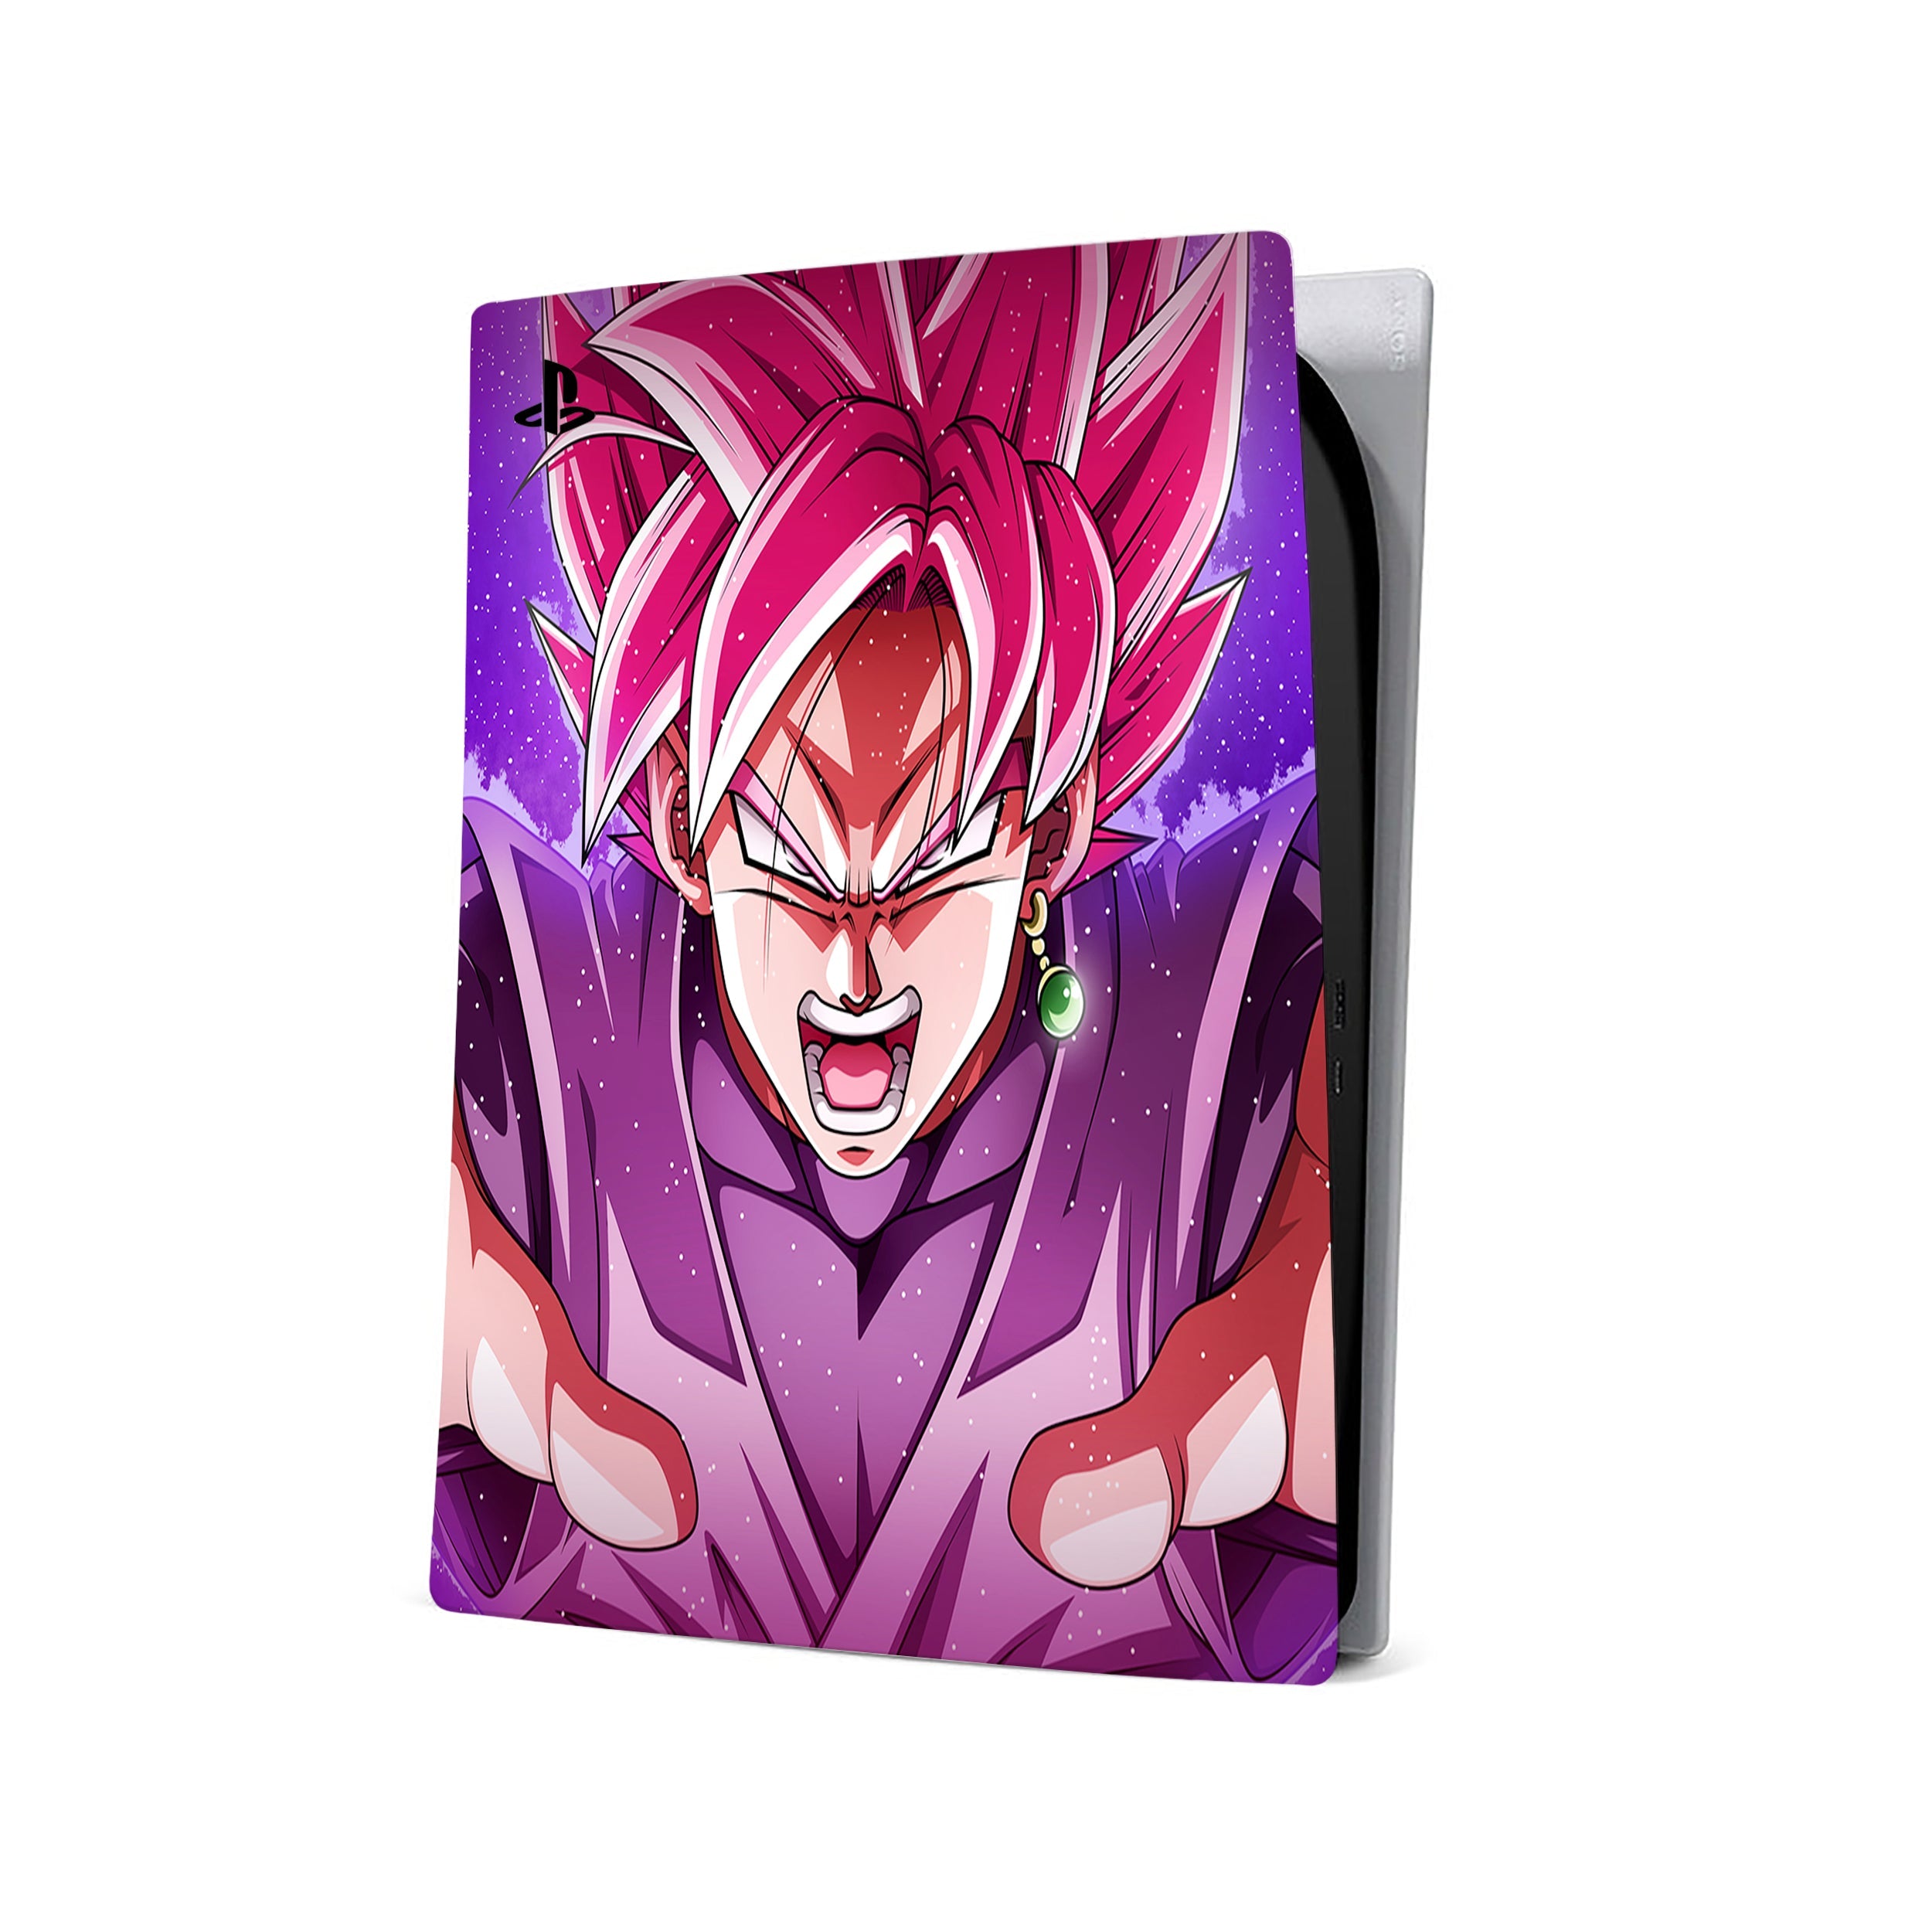 A video game skin featuring a Dragon Ball Super Goku design for the PS5.